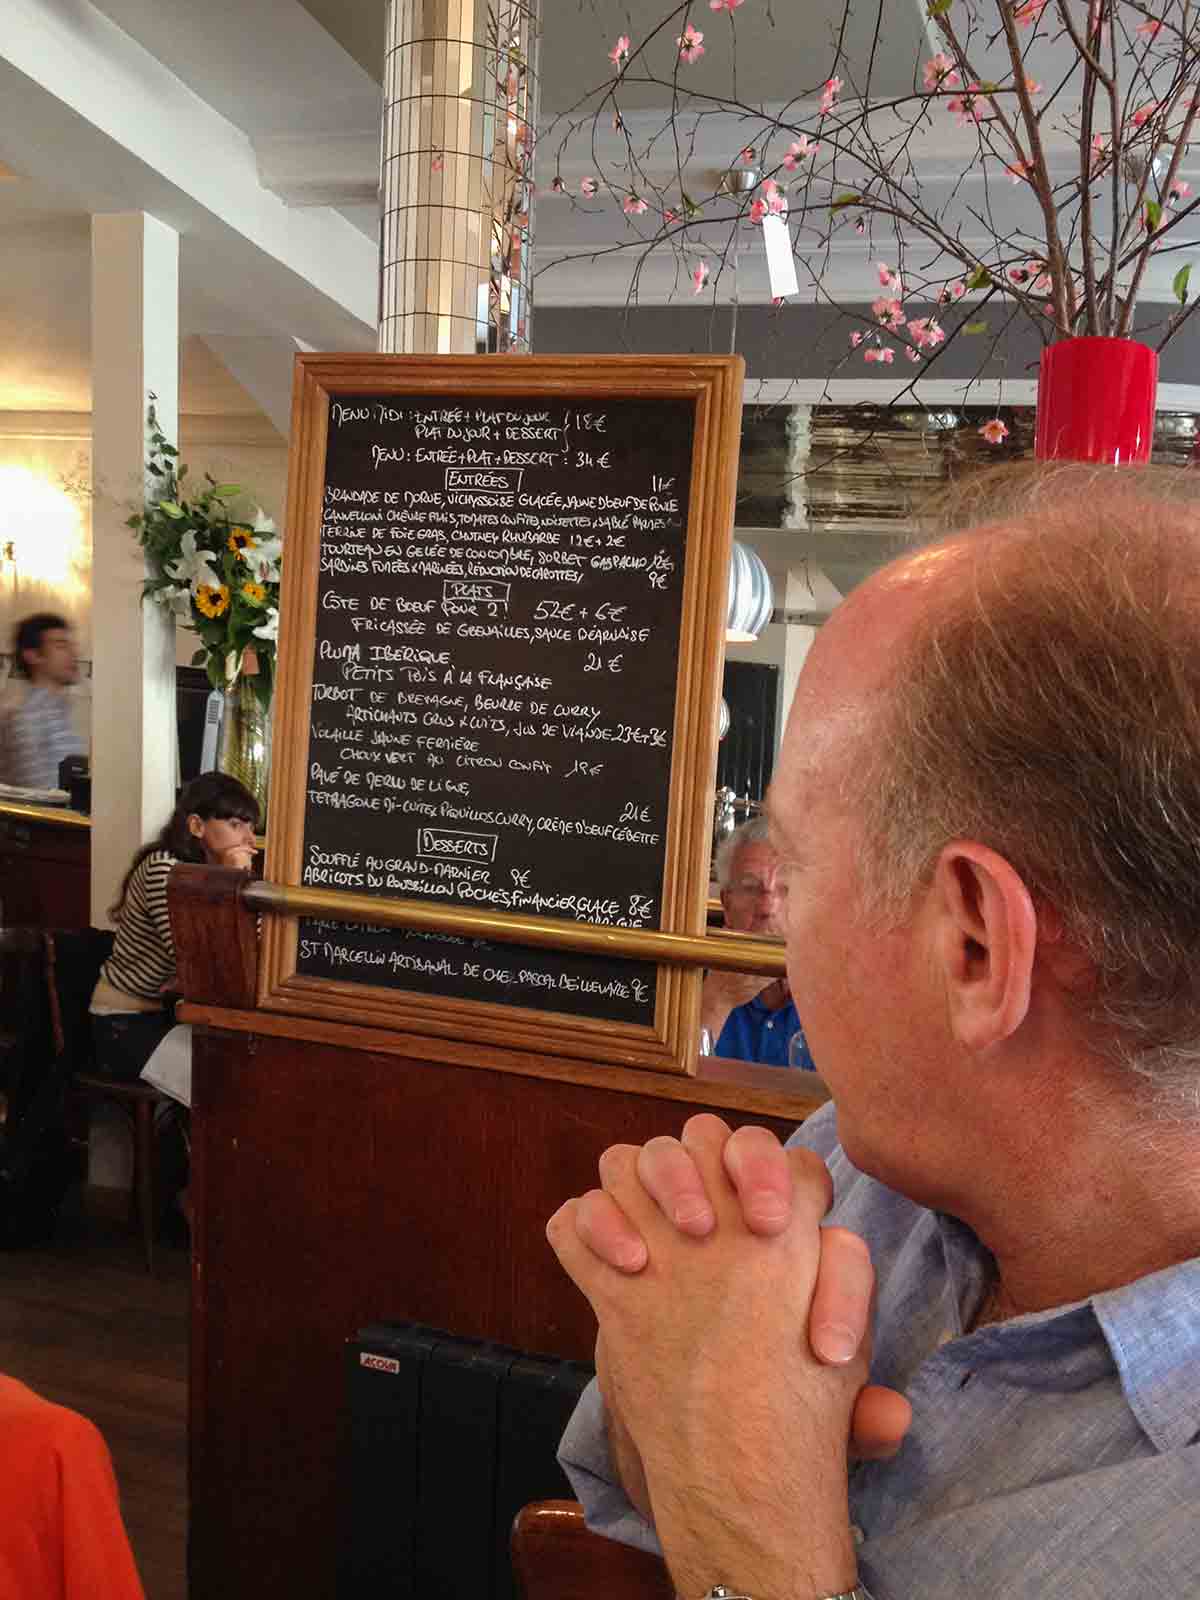 The One looking at a menu board in a cafe.